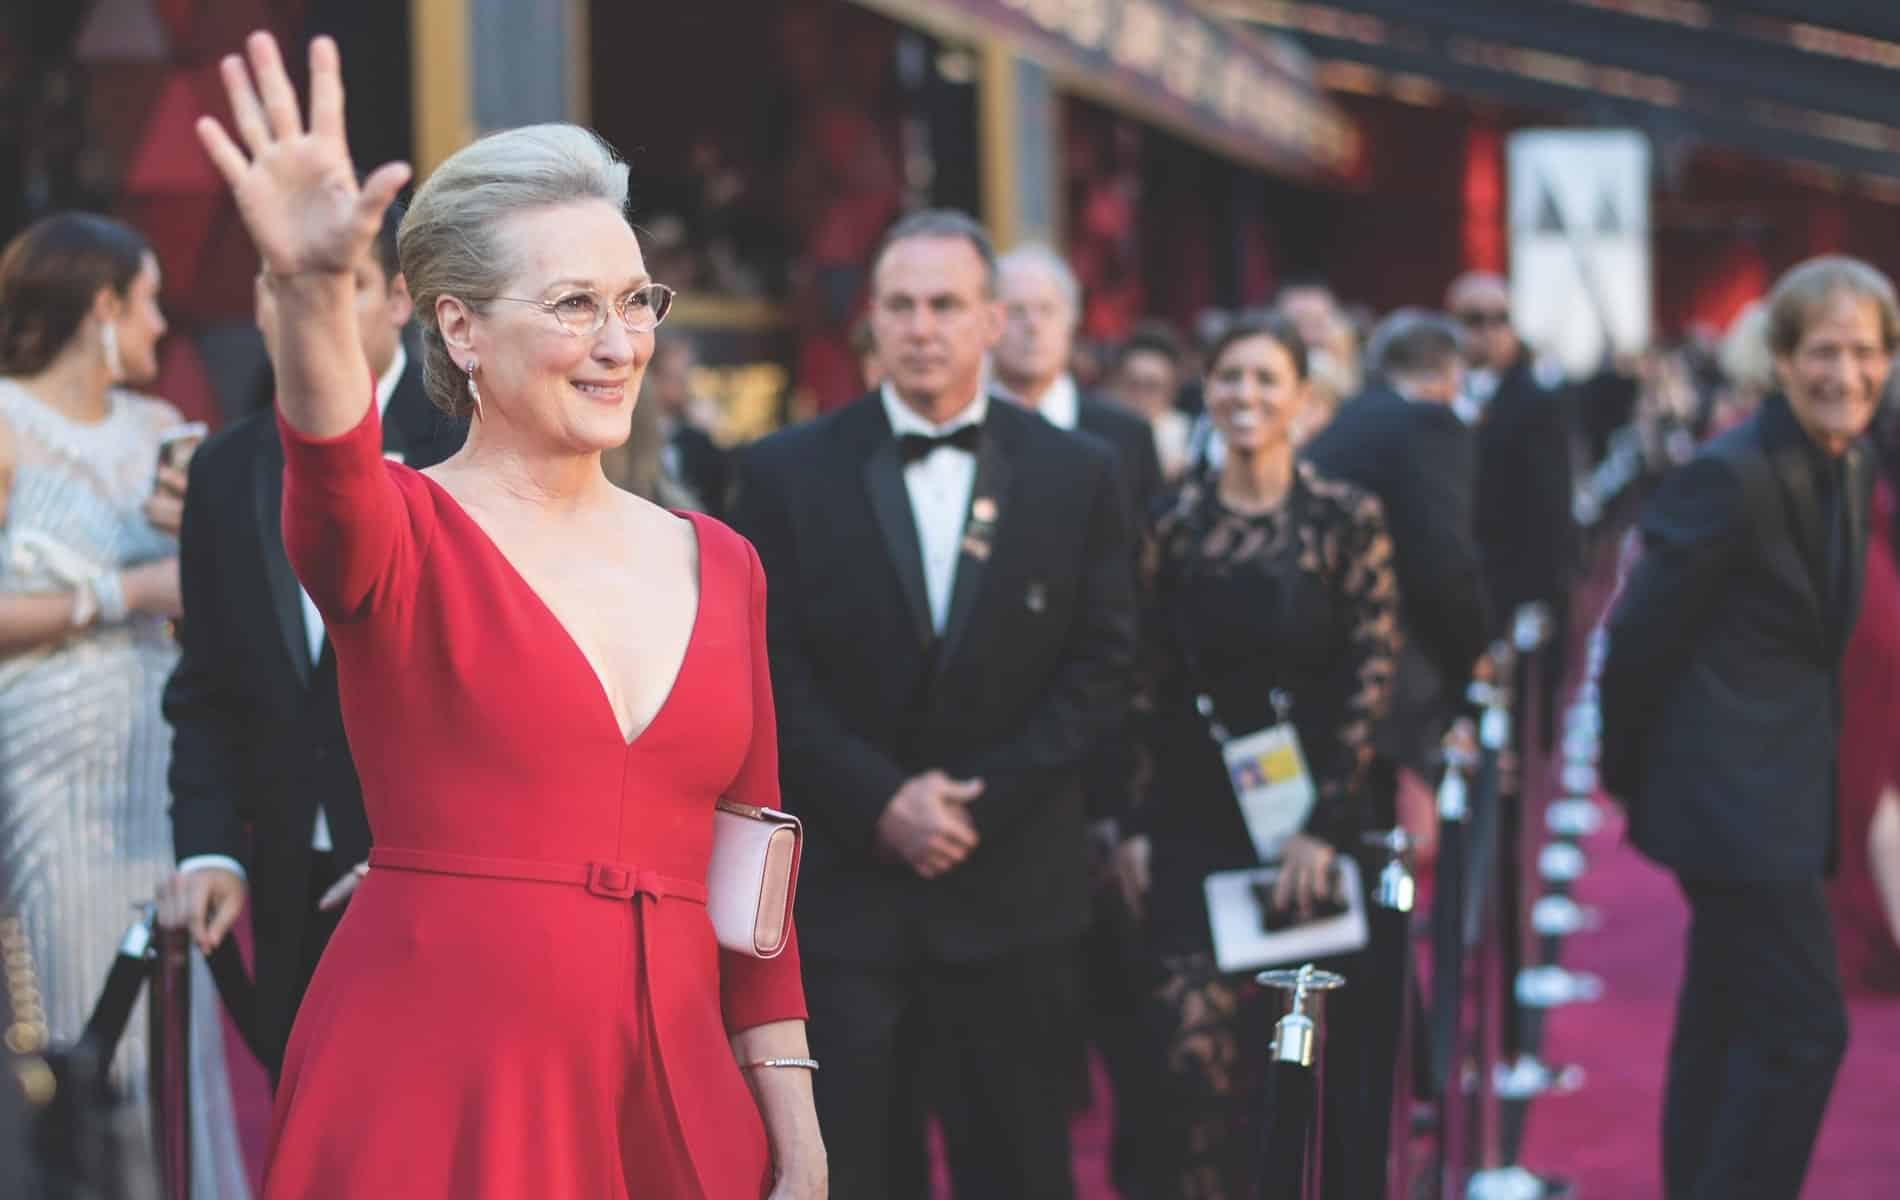 Academy Awards 2018, Academy Awards, 90th Academy Awards, The Oscars, Academy of Motion Picture Arts and Sciences, Dolby Theatre, Meryl Streep